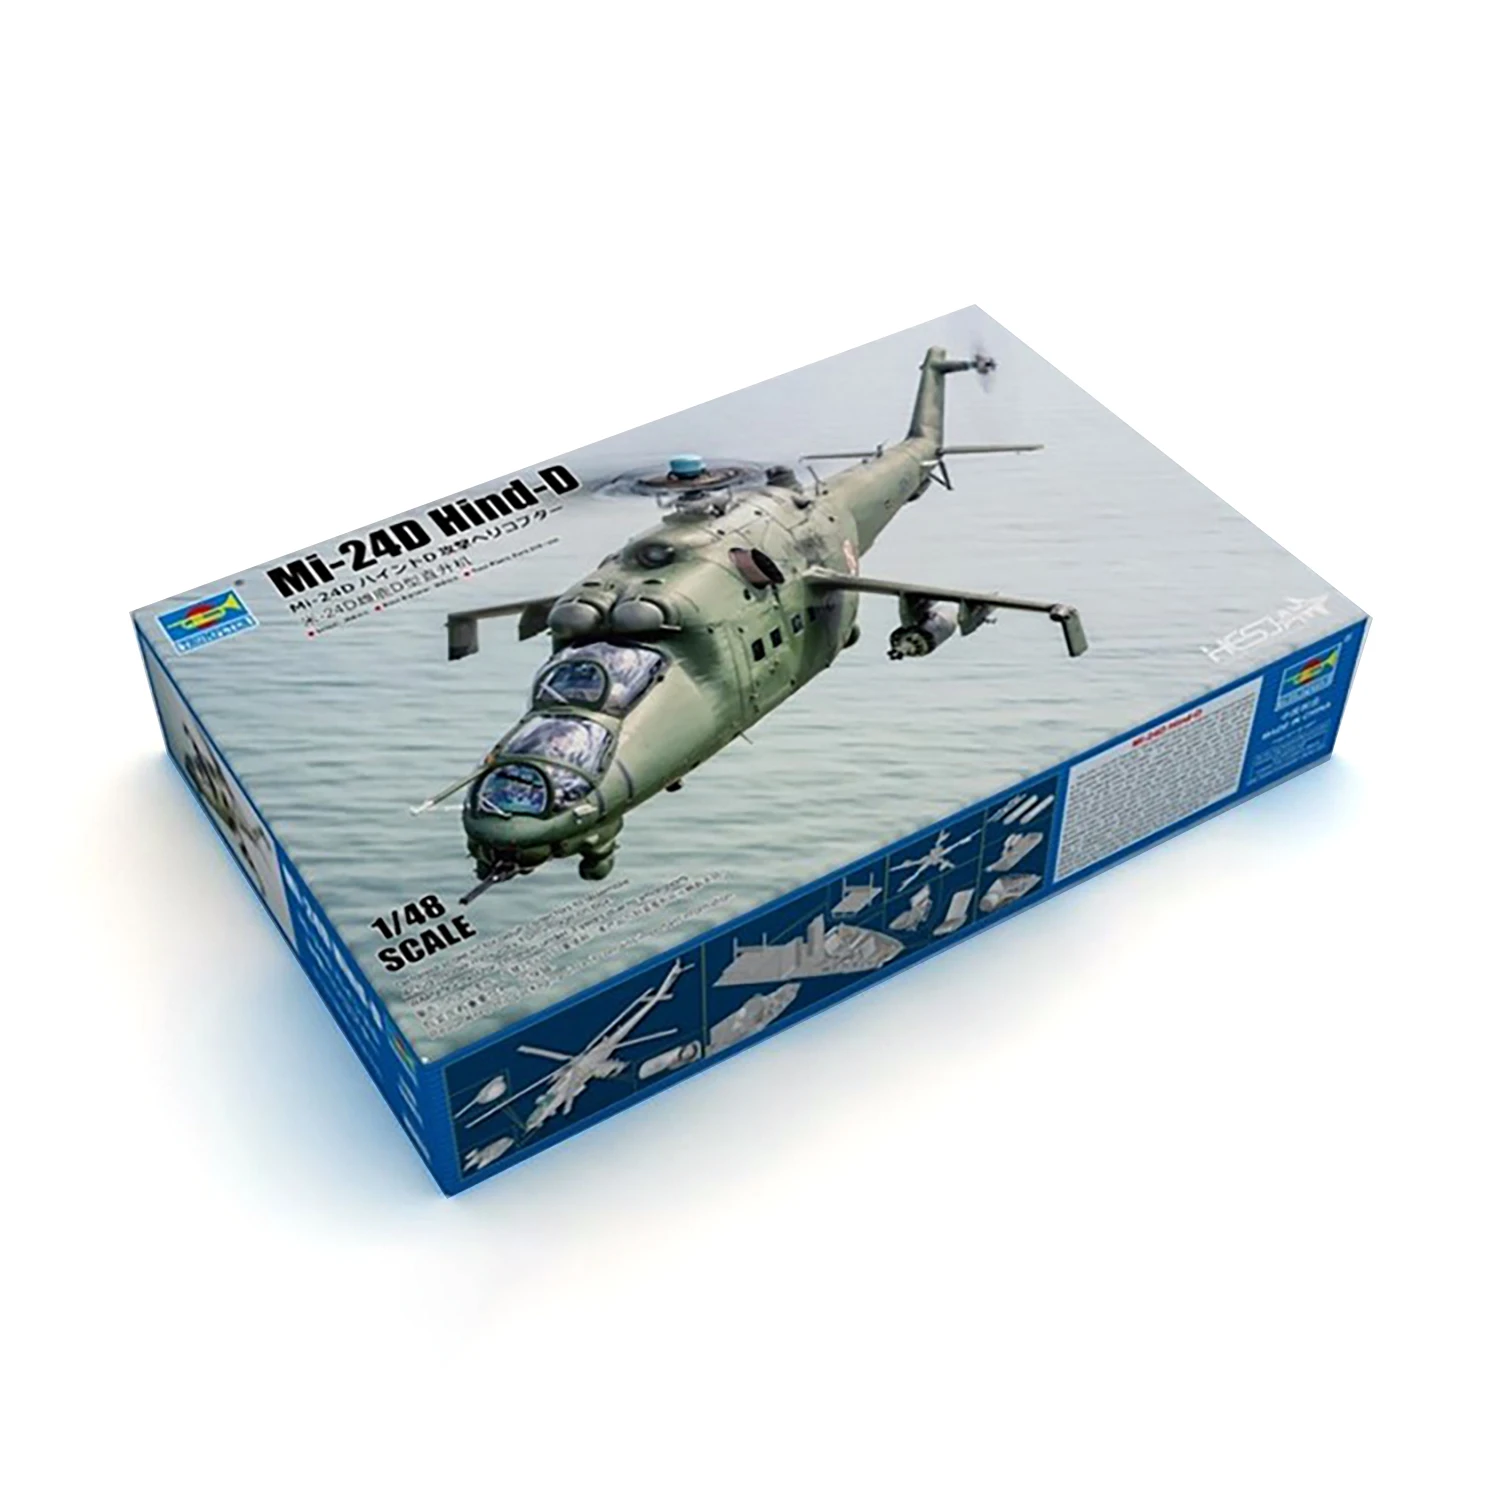 1/48 Mi-24P Hind-F/D Helicopter Model DIY Building Model Kit for Collection 